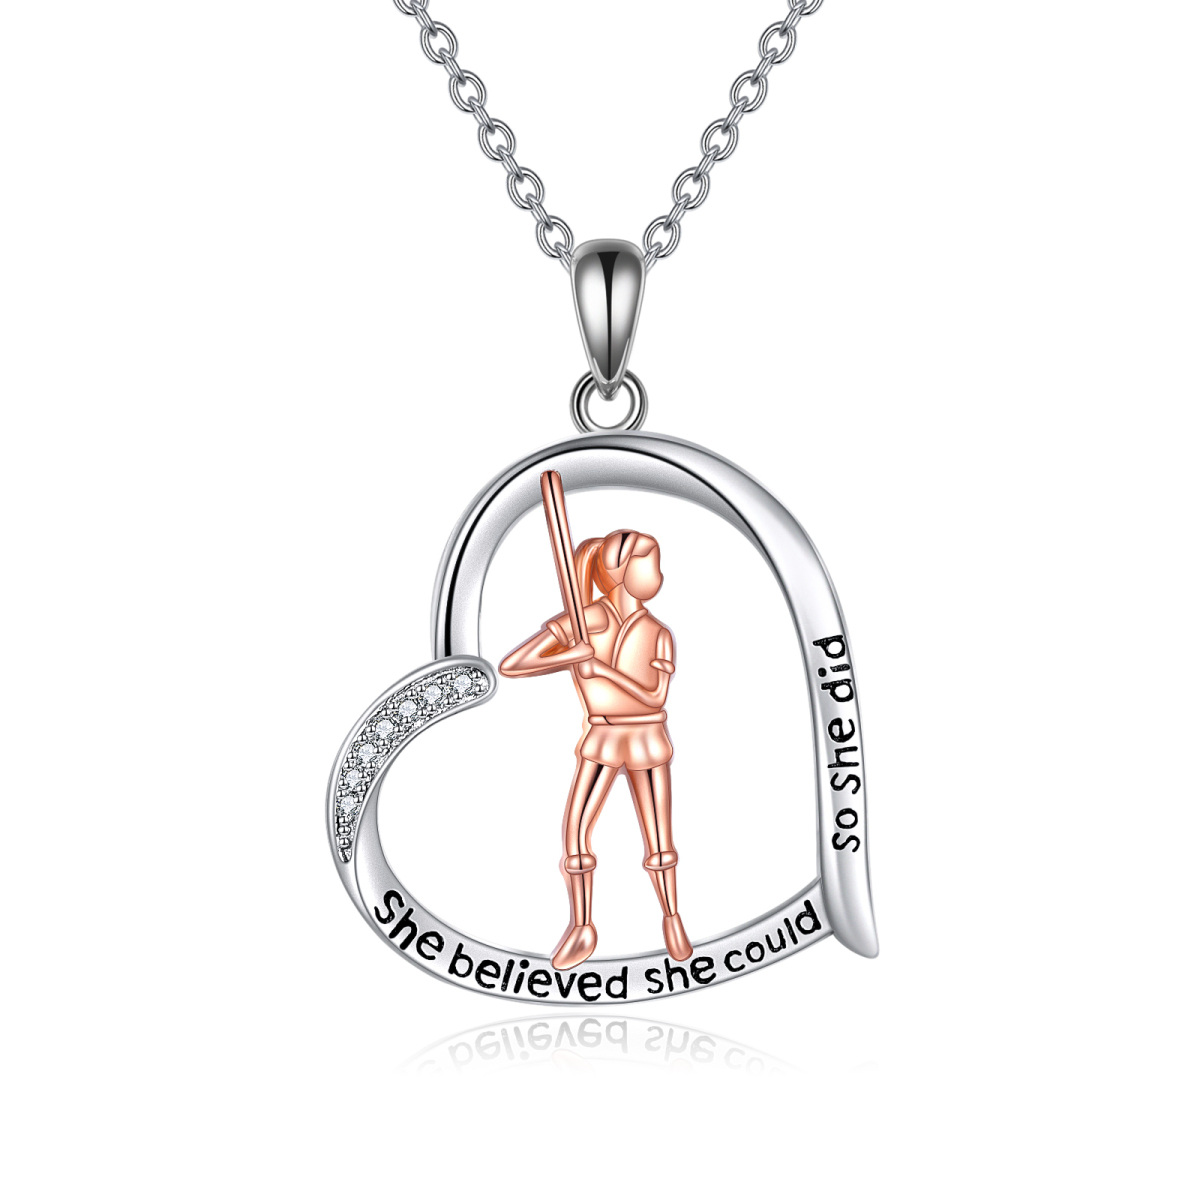 Sterling Silver Two-tone Cubic Zirconia Baseball & Heart Pendant Necklace with Engraved Word-1